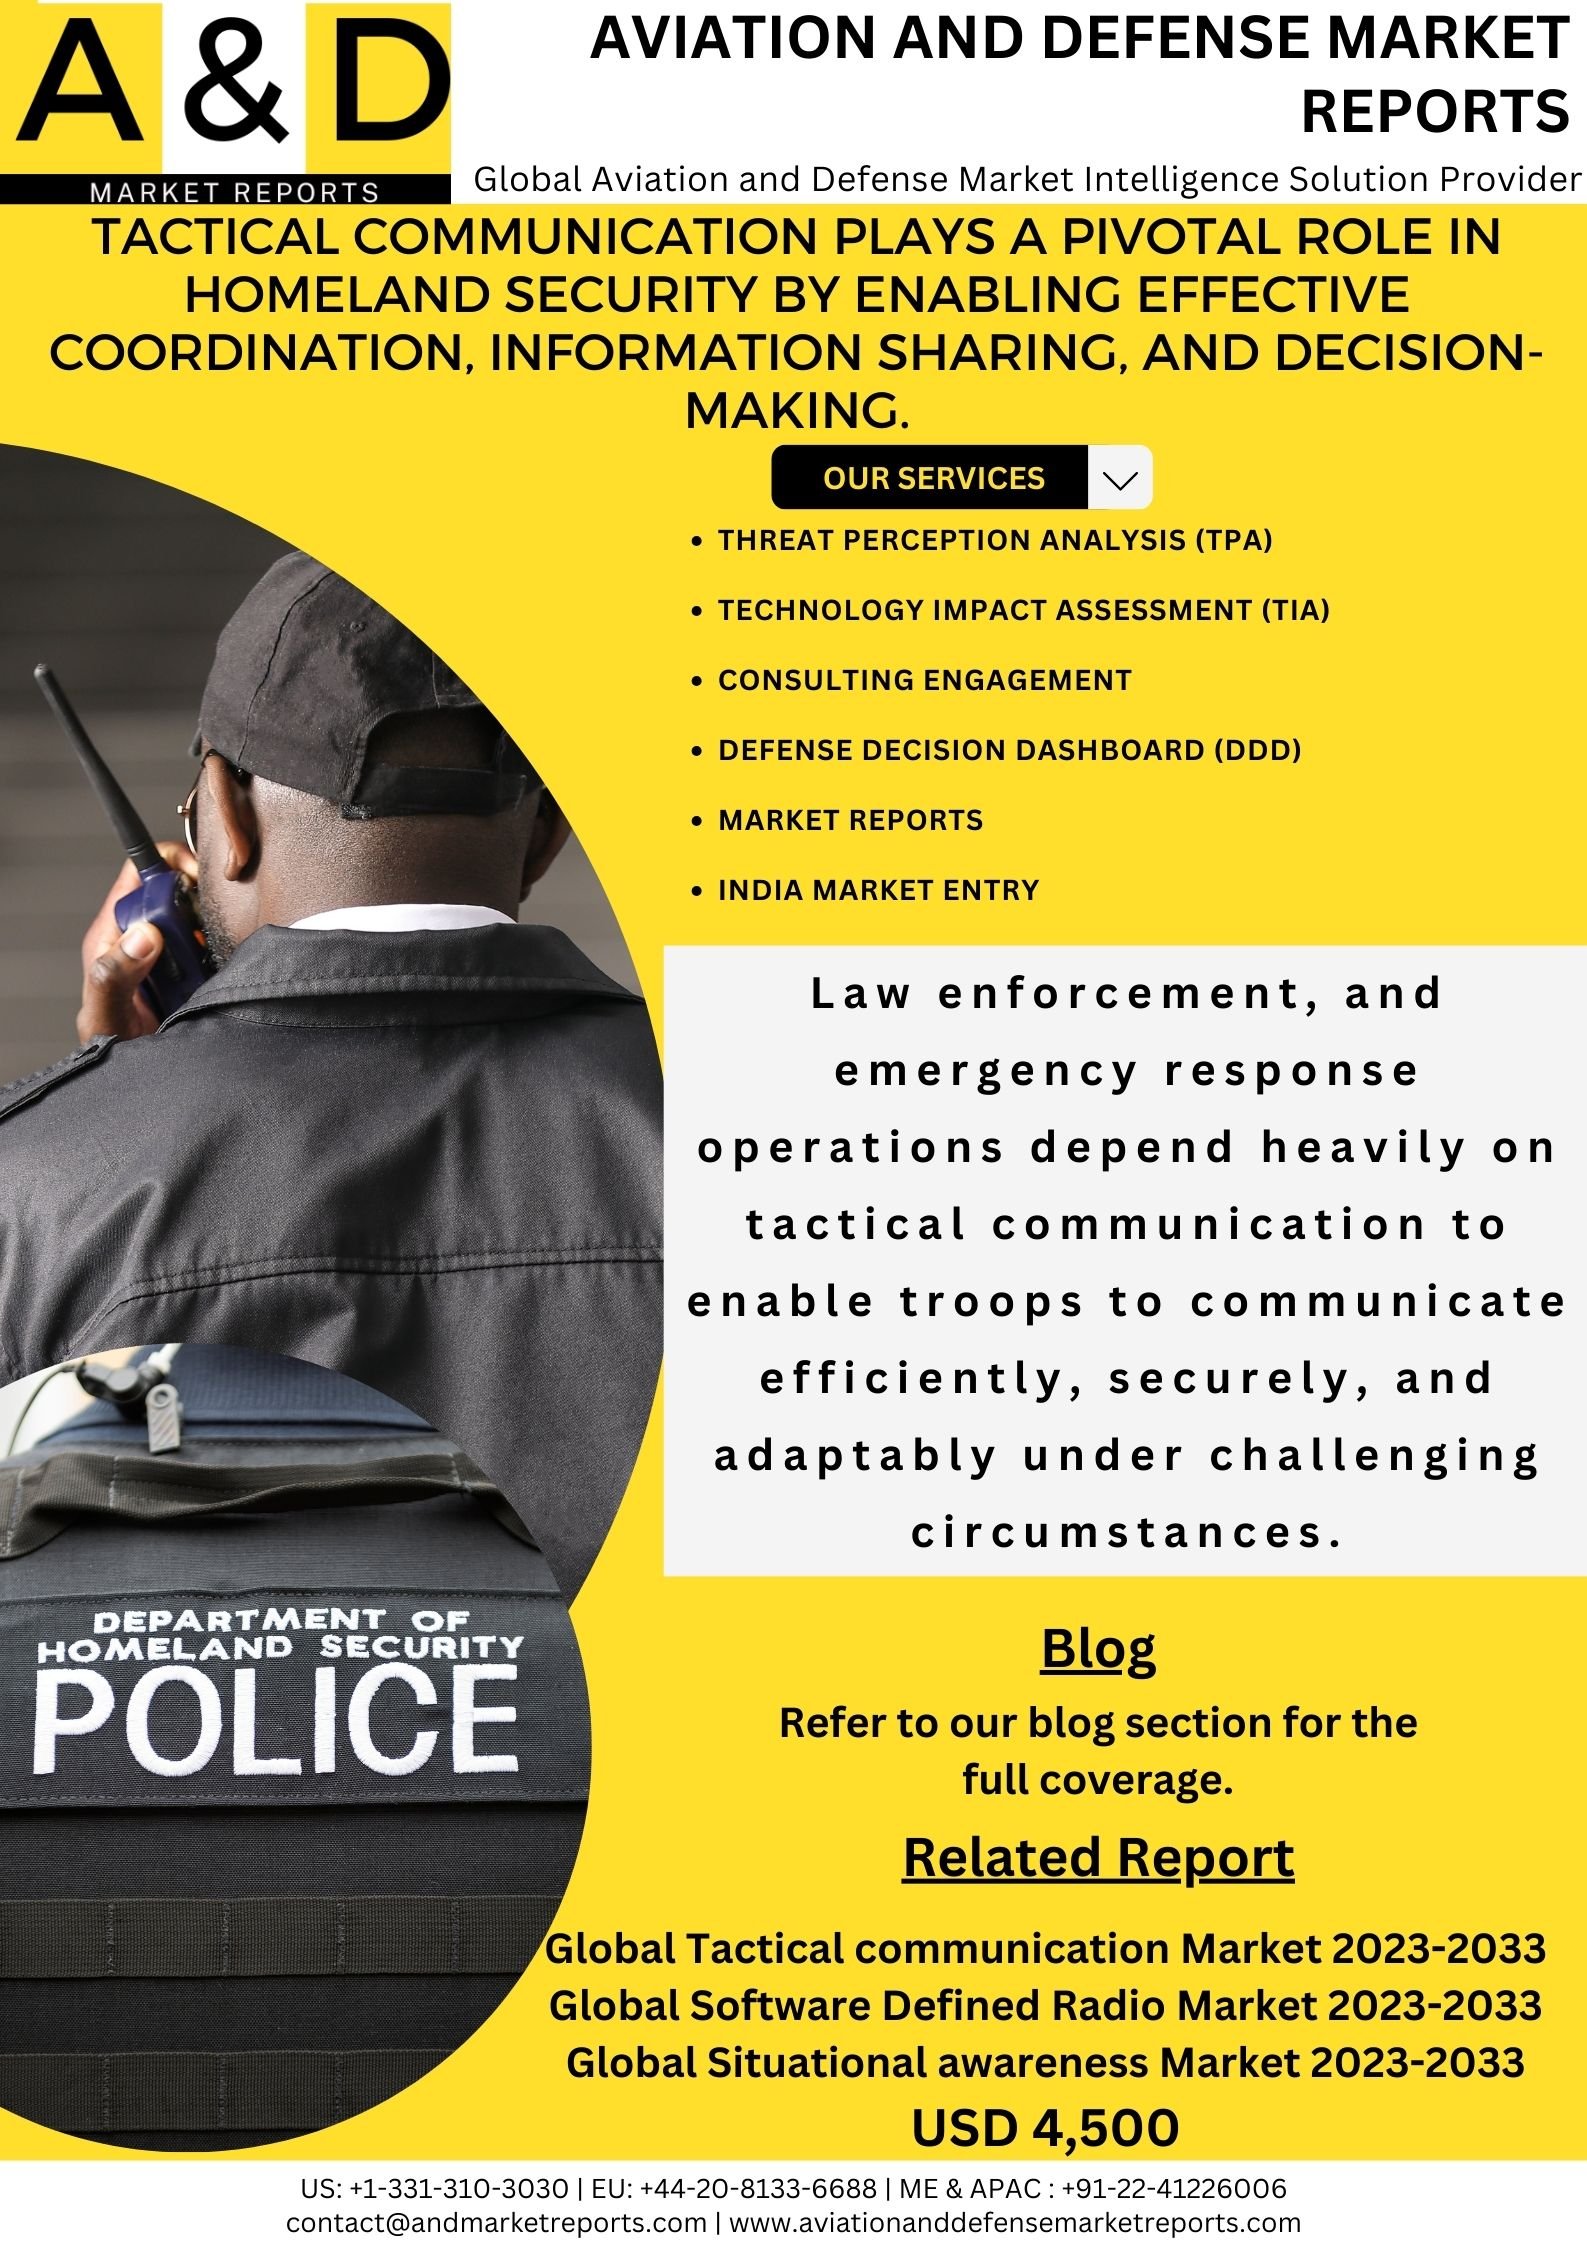 TACTICAL COMMUNICATION PLAYS A PIVOTAL ROLE IN HOMELAND SECURITY BY ENABLING EFFECTIVE COORDINATION, INFORMATION SHARING, AND DECISION-MAKING